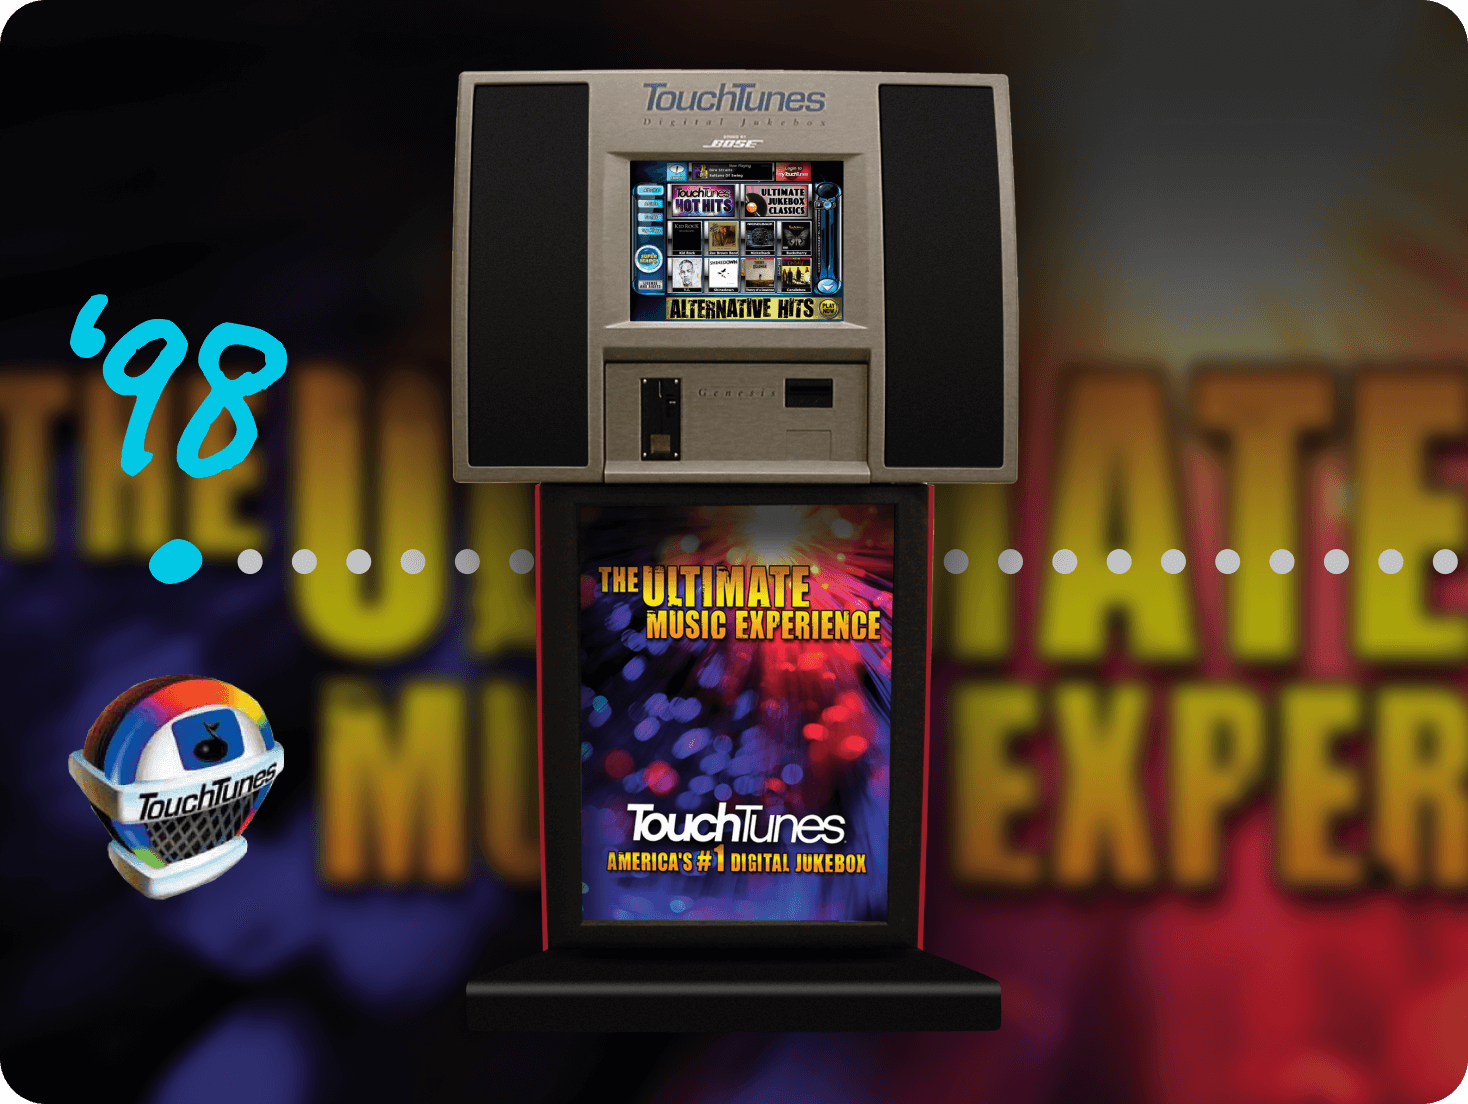 TouchTunes first jukebox